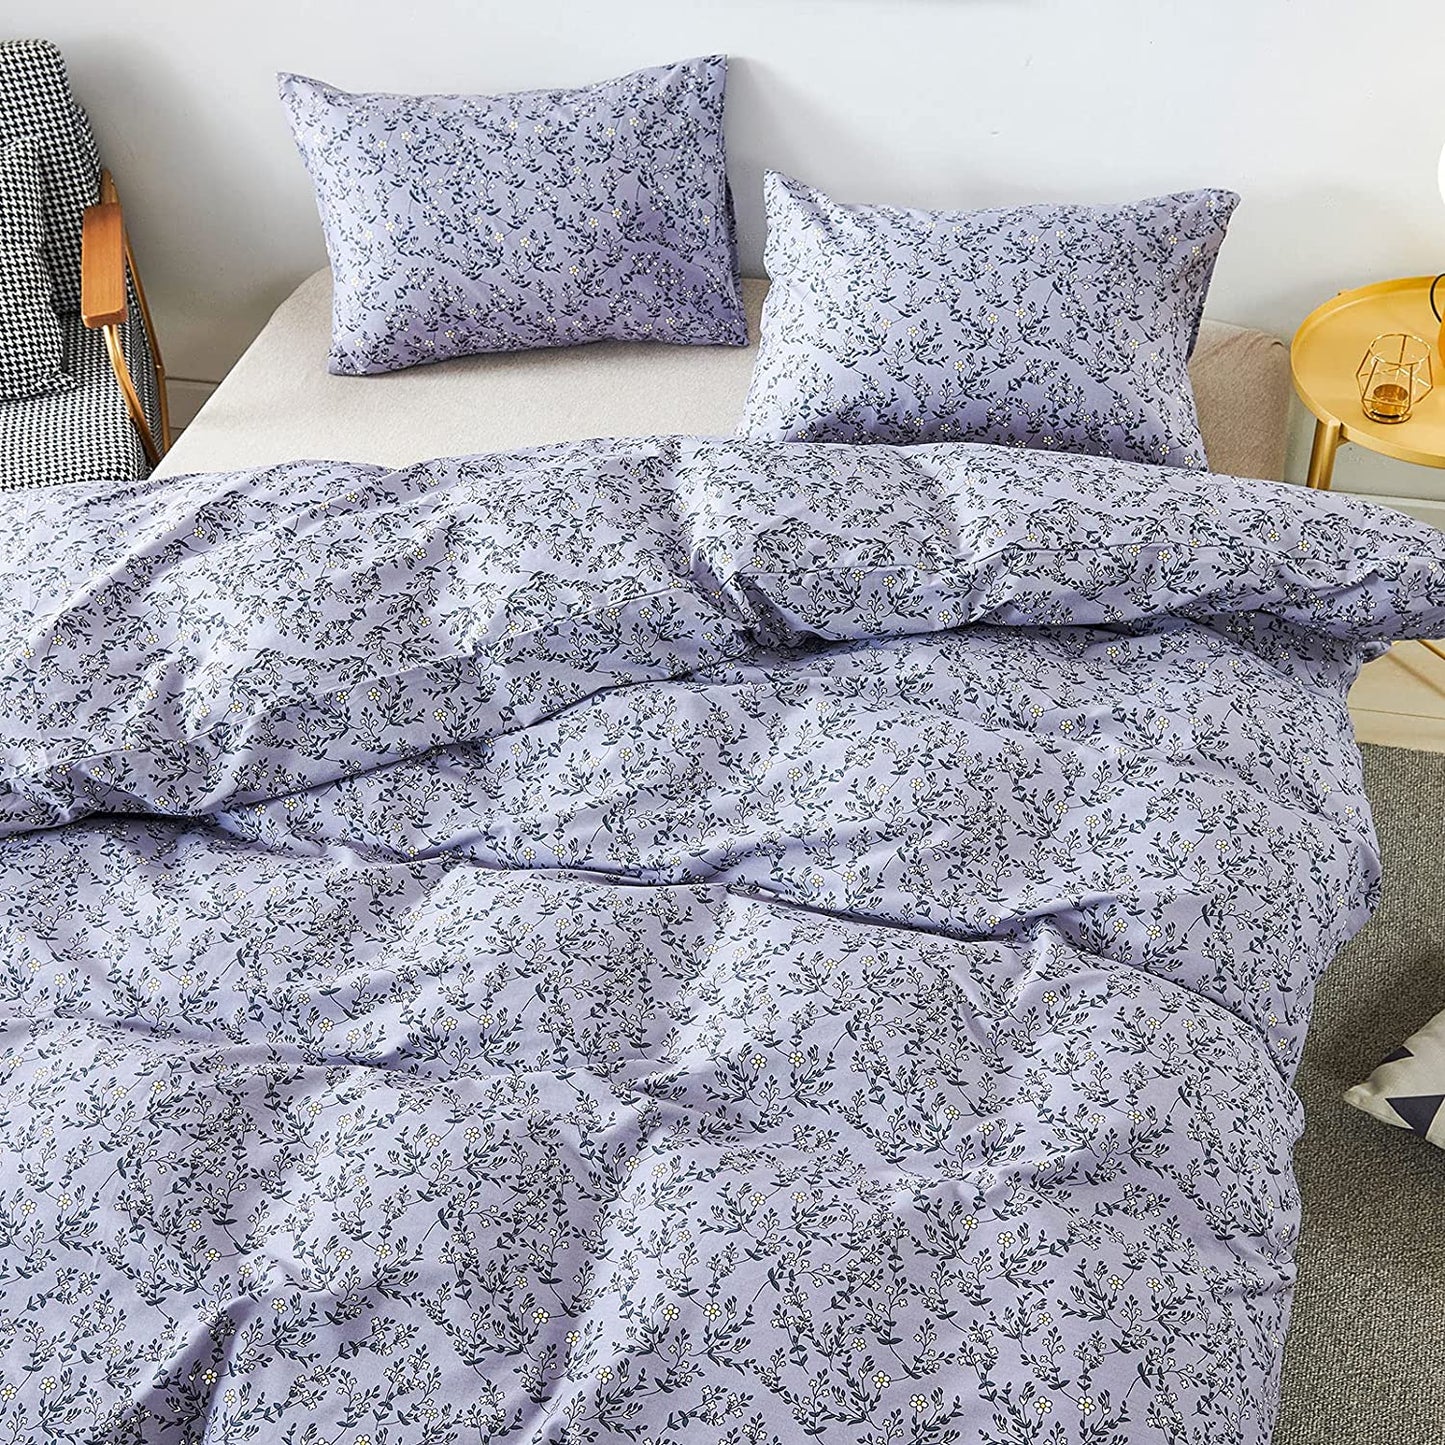 100% Cotton Comforter Cover Floral Duvet Cover Sets,Pale Purple Duvet Cover with Zipper Closure and Corner Ties